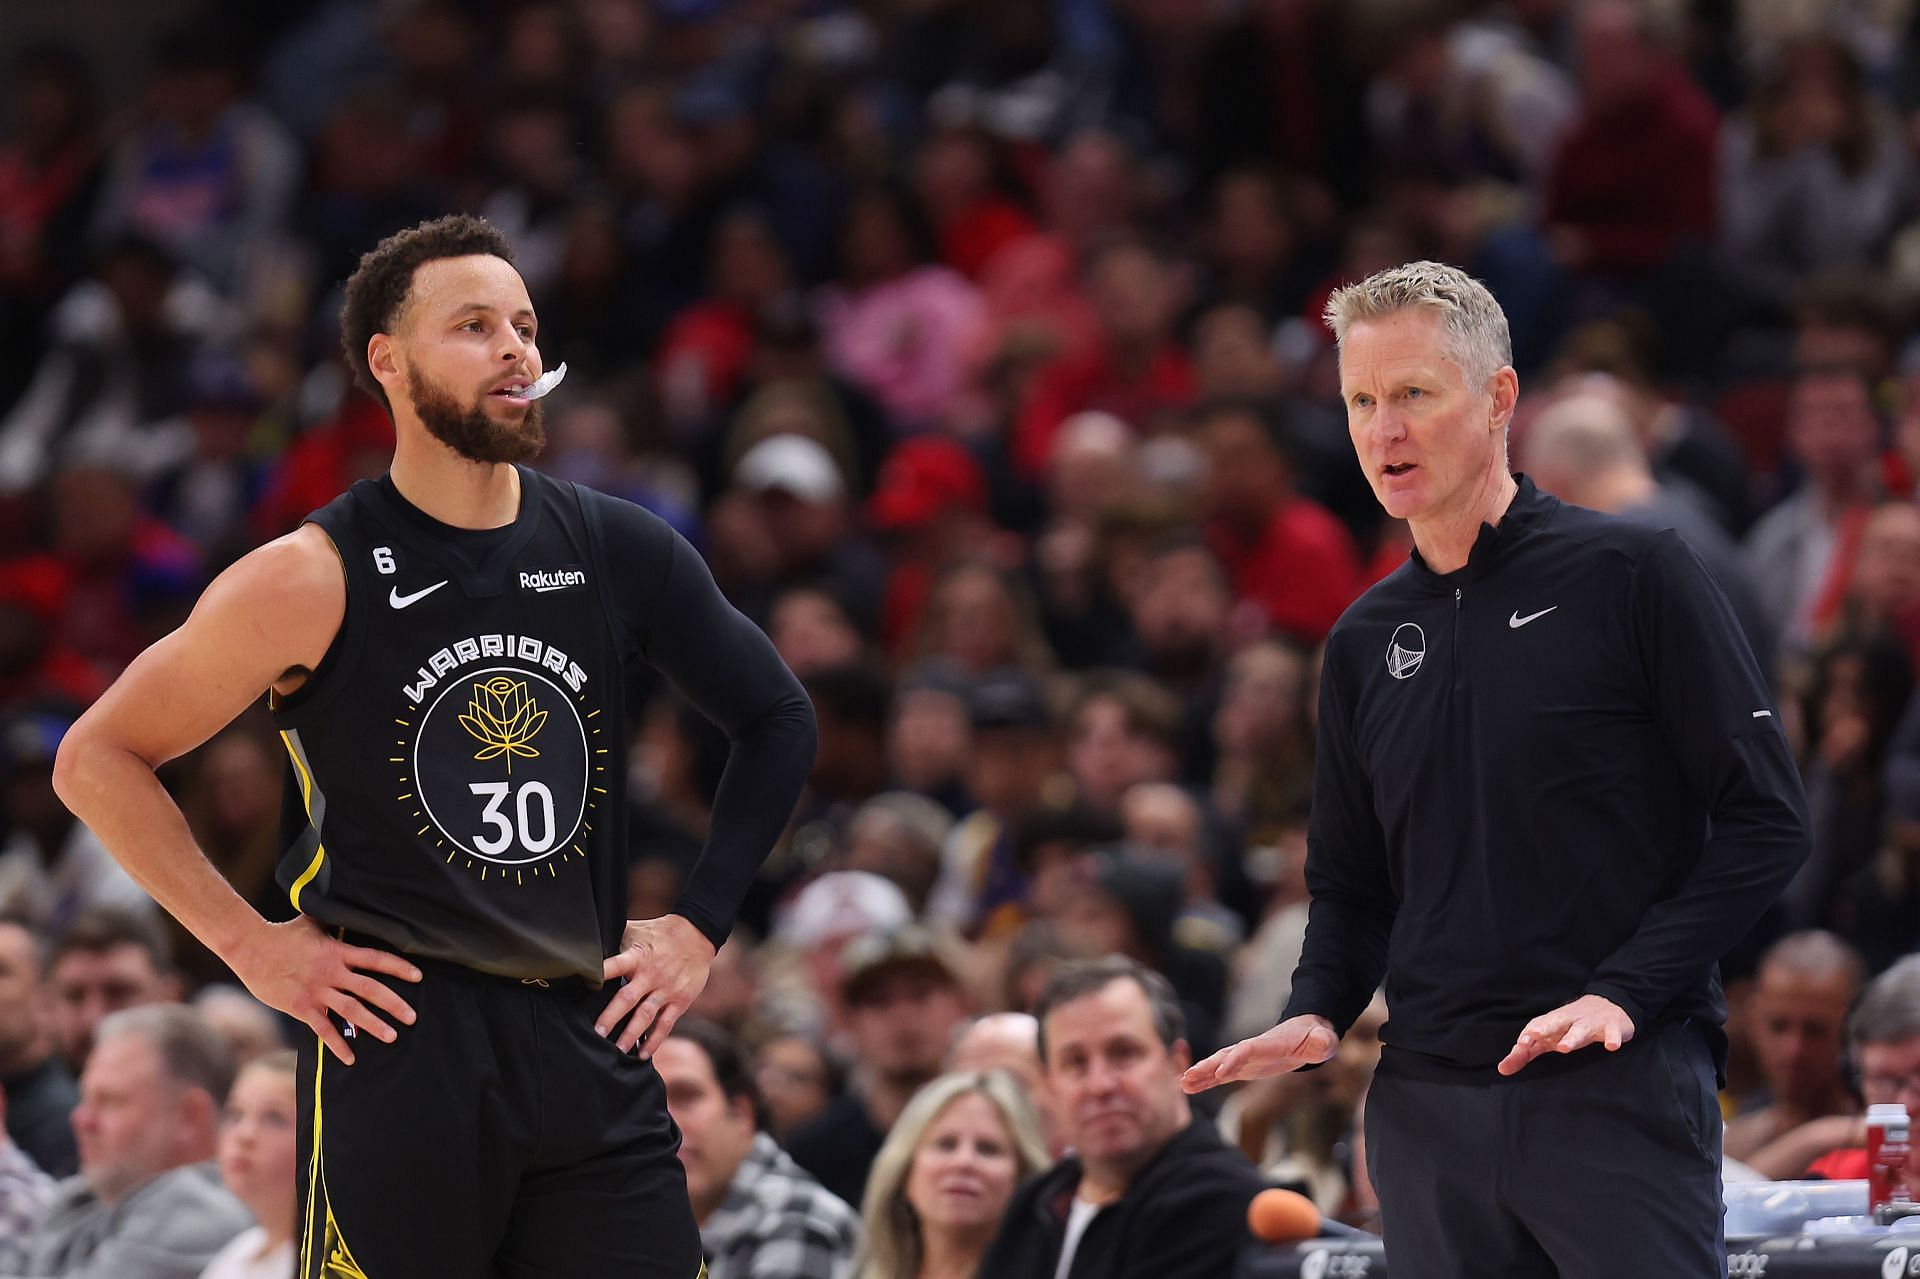 Steph Curry (left) and Steve Kerr of the Golden State Warriors